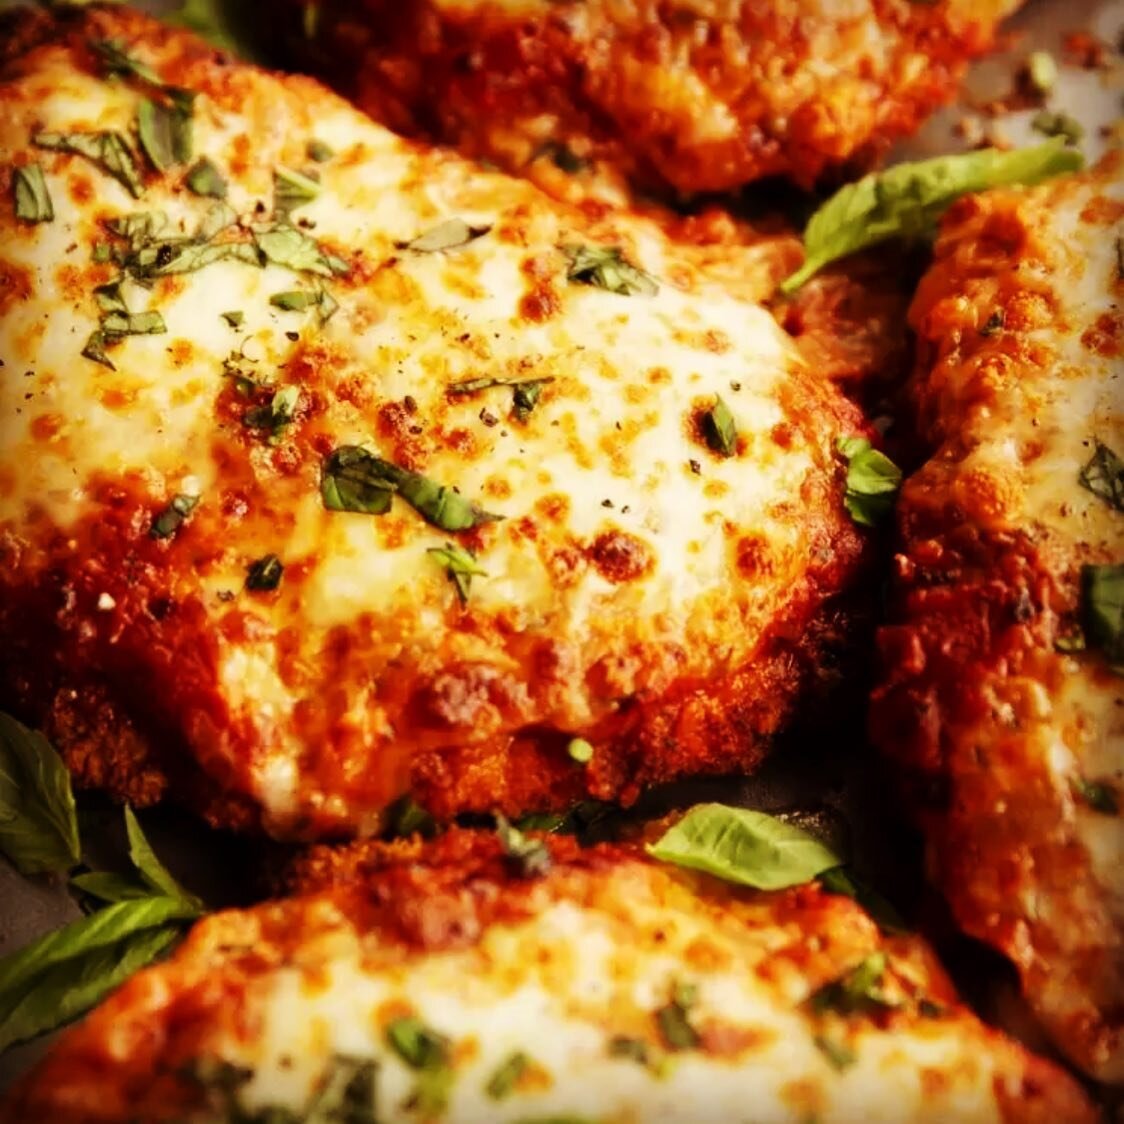 #FRIDAYNIGHTLIVE #FNL #NOTSOLOCKEDDOWNLIVE

Like a blast from past and I can not believe I haven&rsquo;t done this awesome dish on a #FRIDAYNIGHTLIVE yet! Think breaded chicken breast, melted cheese and a tangy tomato based Italian sauce. Honestly, i